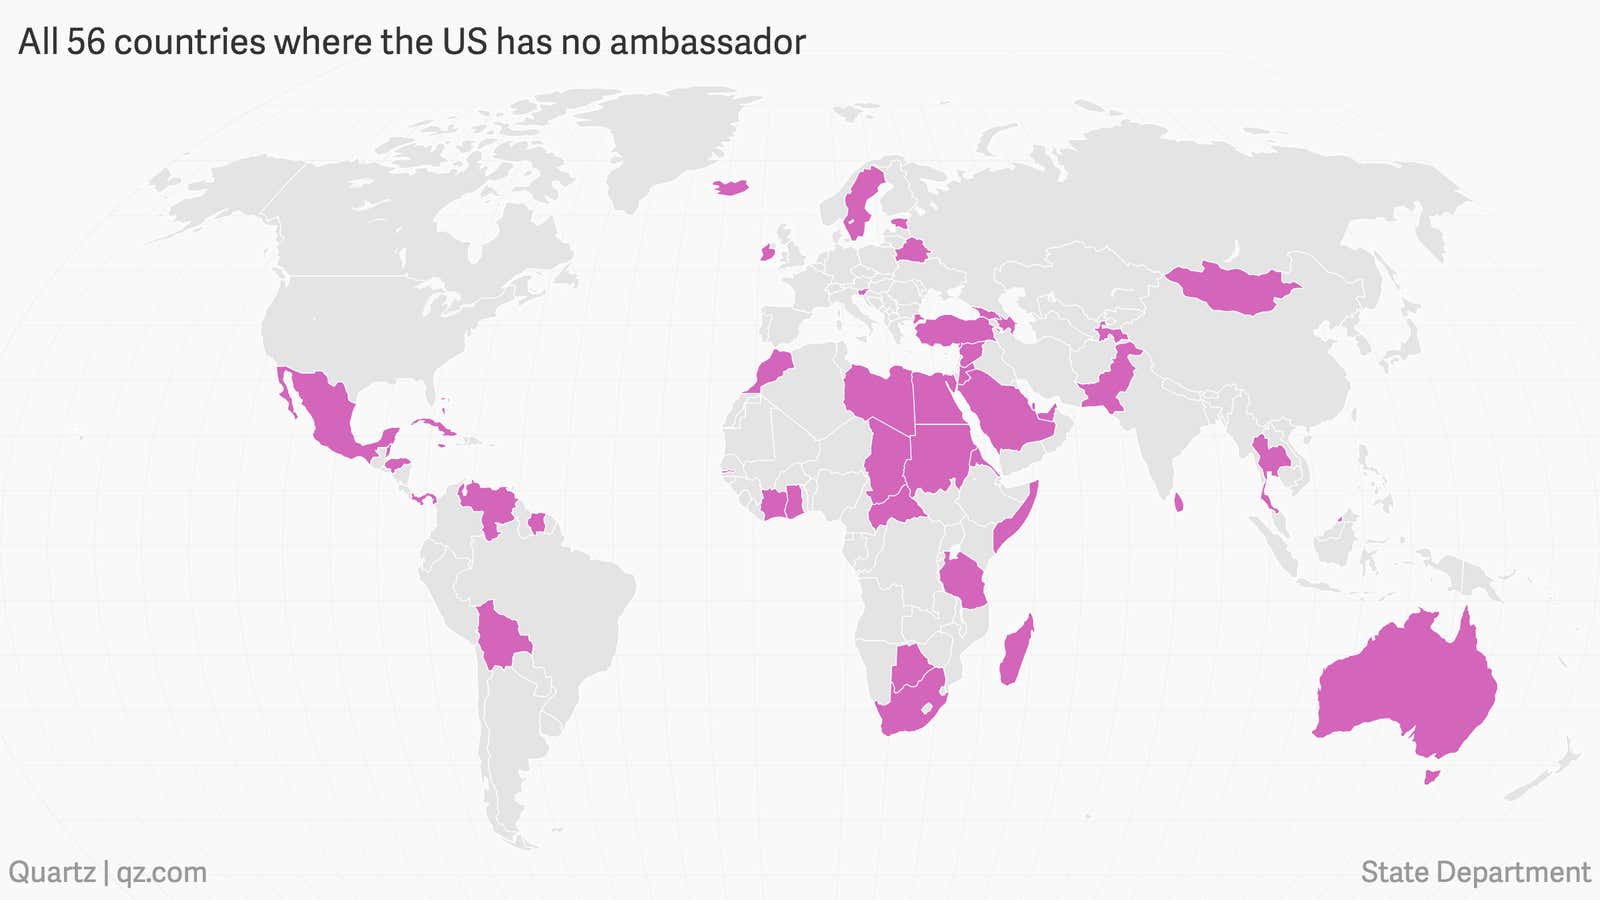 There’s no US ambassador to Saudi Arabia, Turkey, and 54 other countries (some not visible in map above).